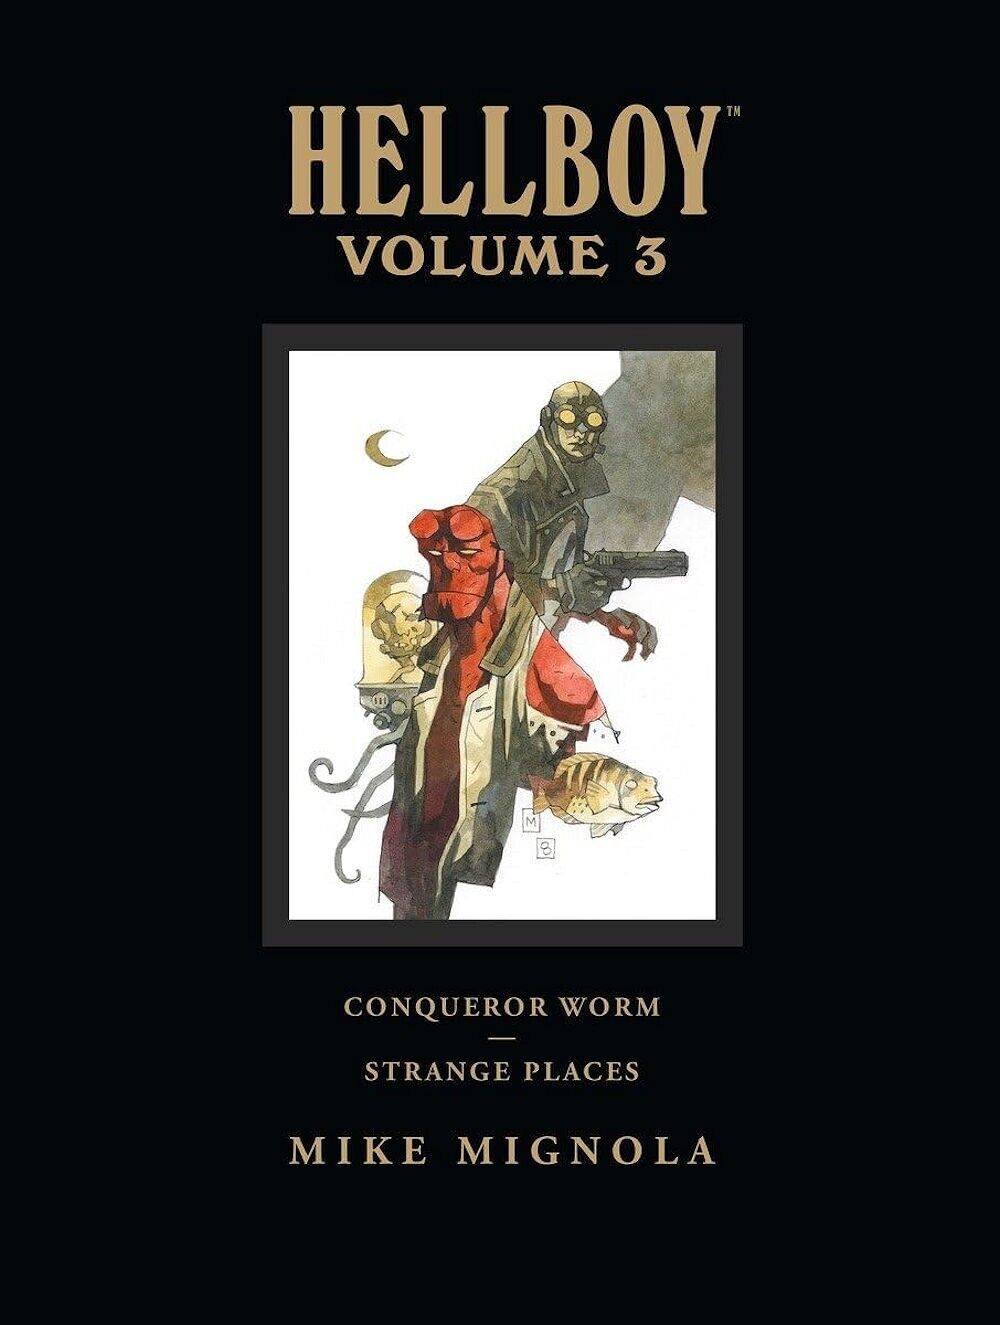 Hellboy Library Edition Vol. 3 Hardcover - FREE U.S. SHIPPING